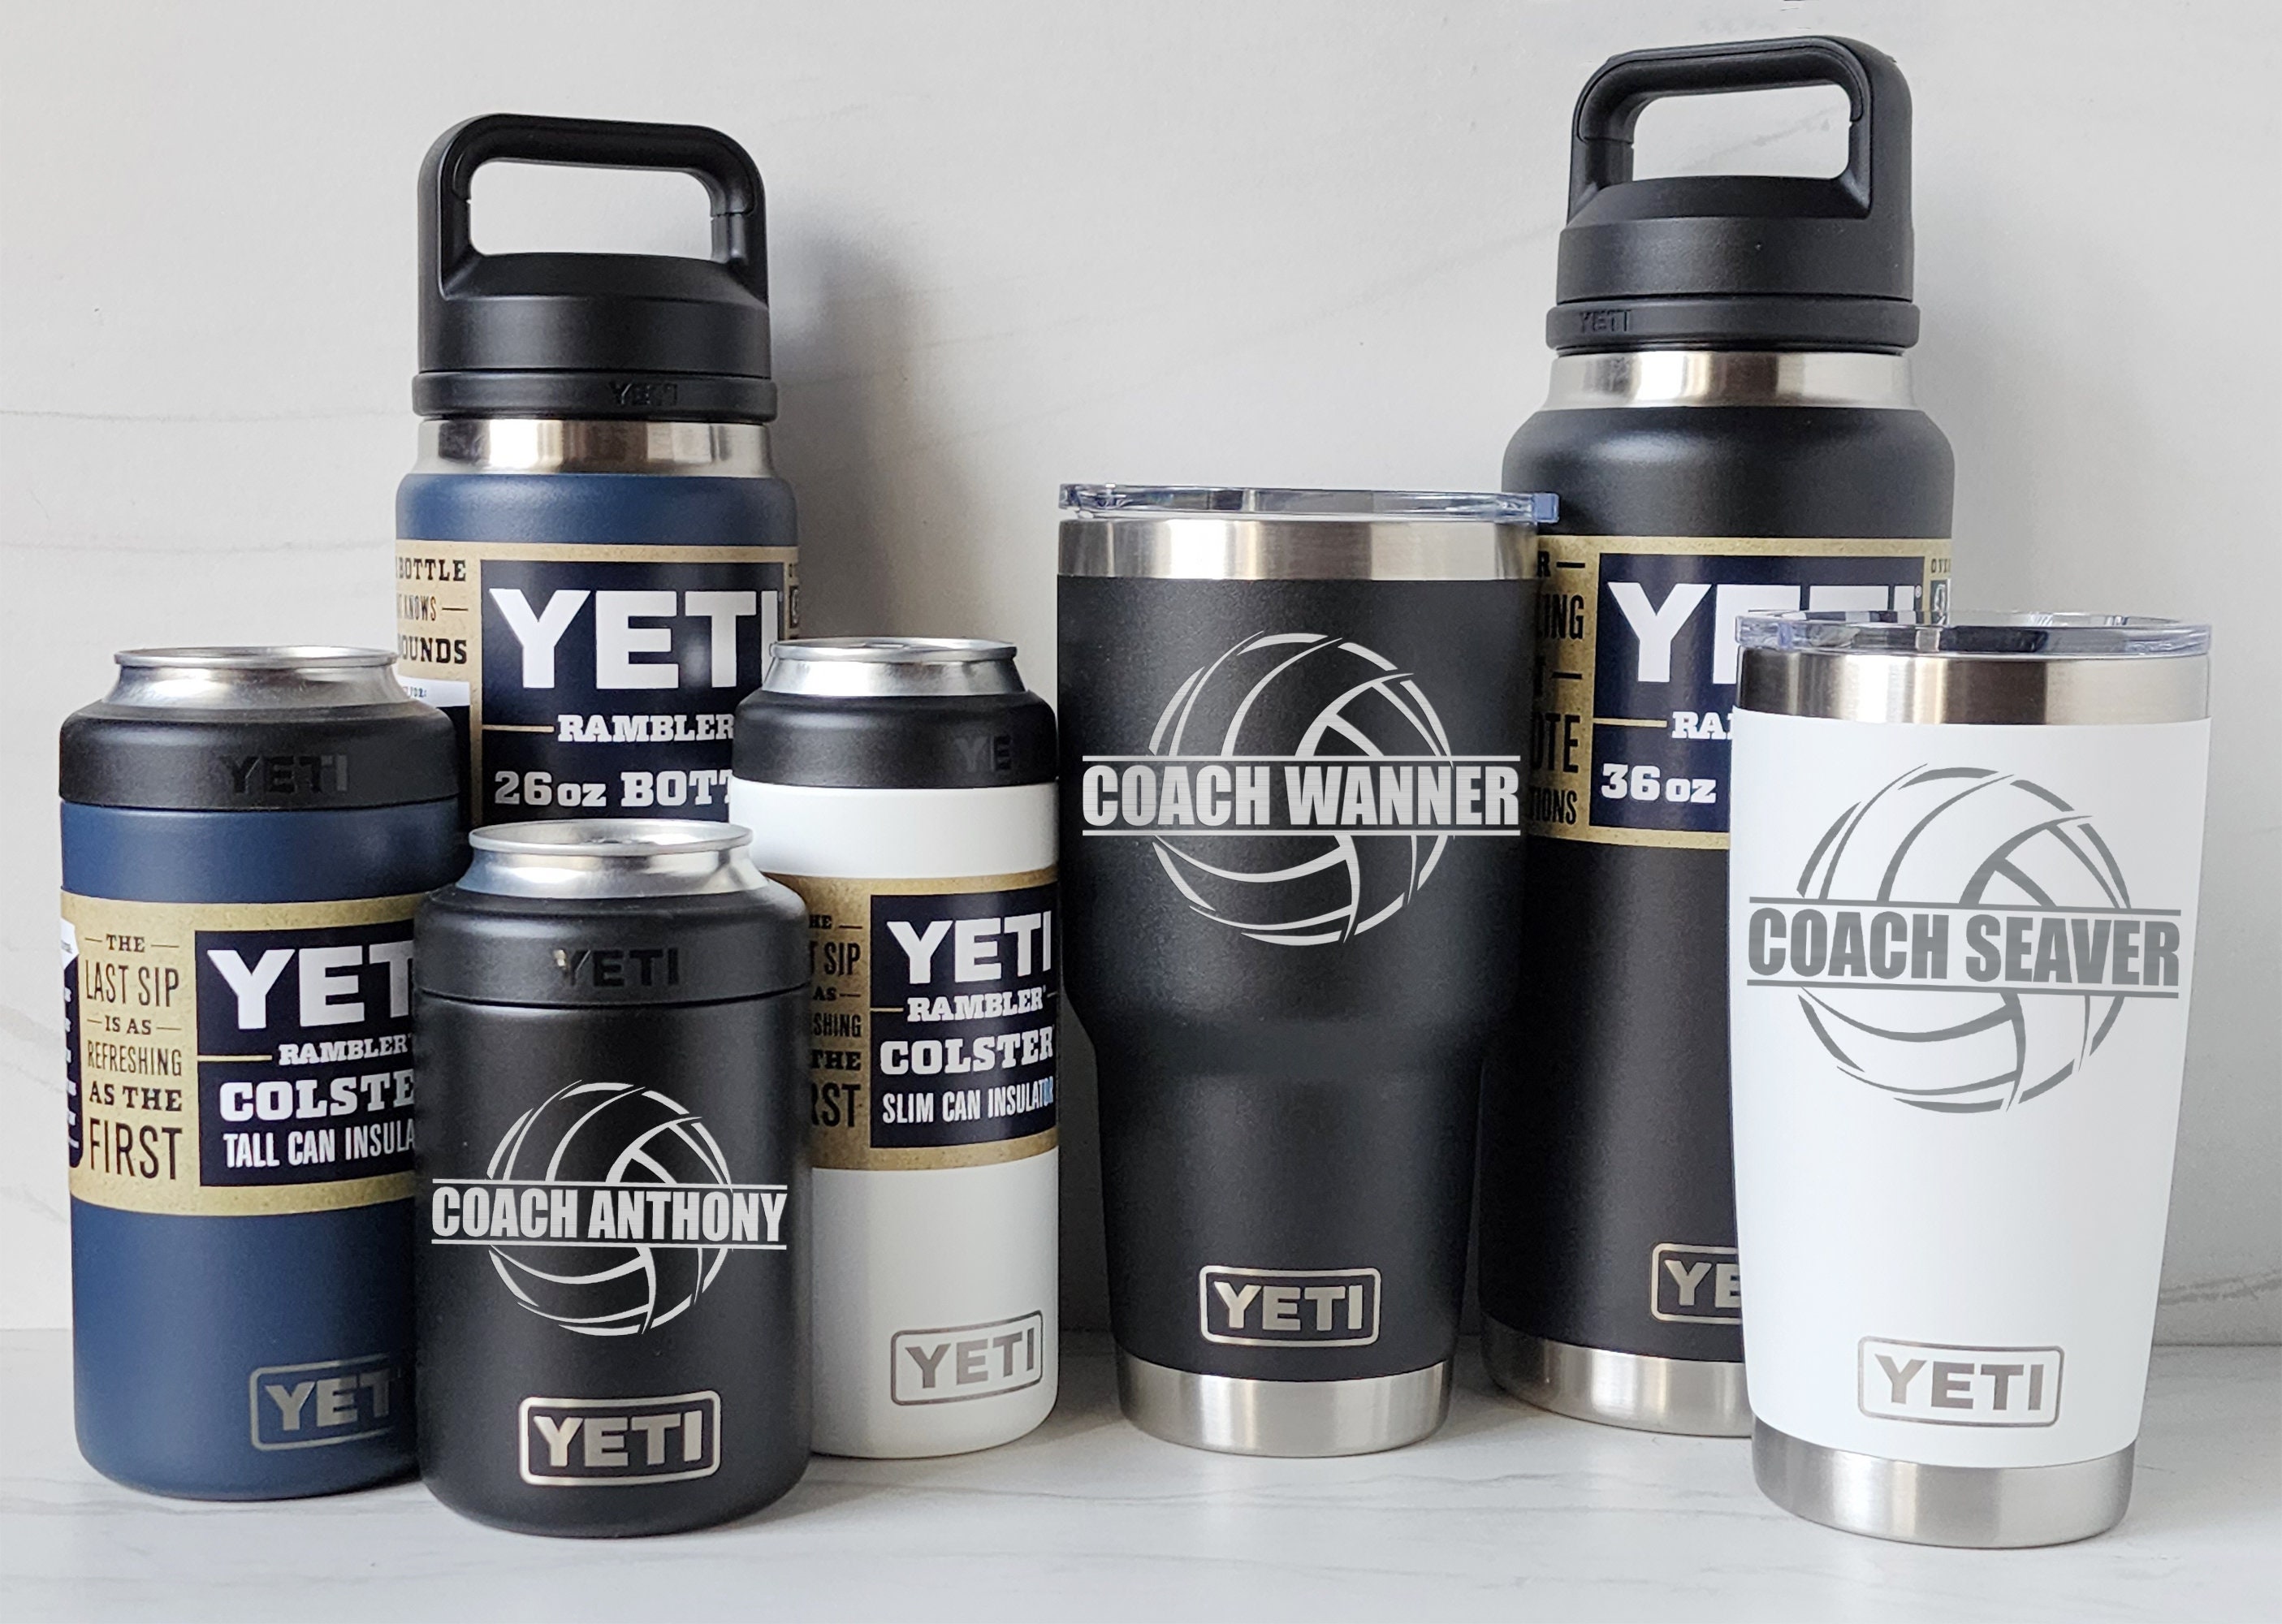  YETI Rambler 36 oz Bottle Retired Color, Vacuum Insulated,  Stainless Steel with Chug Cap, Harvest Red : Sports & Outdoors